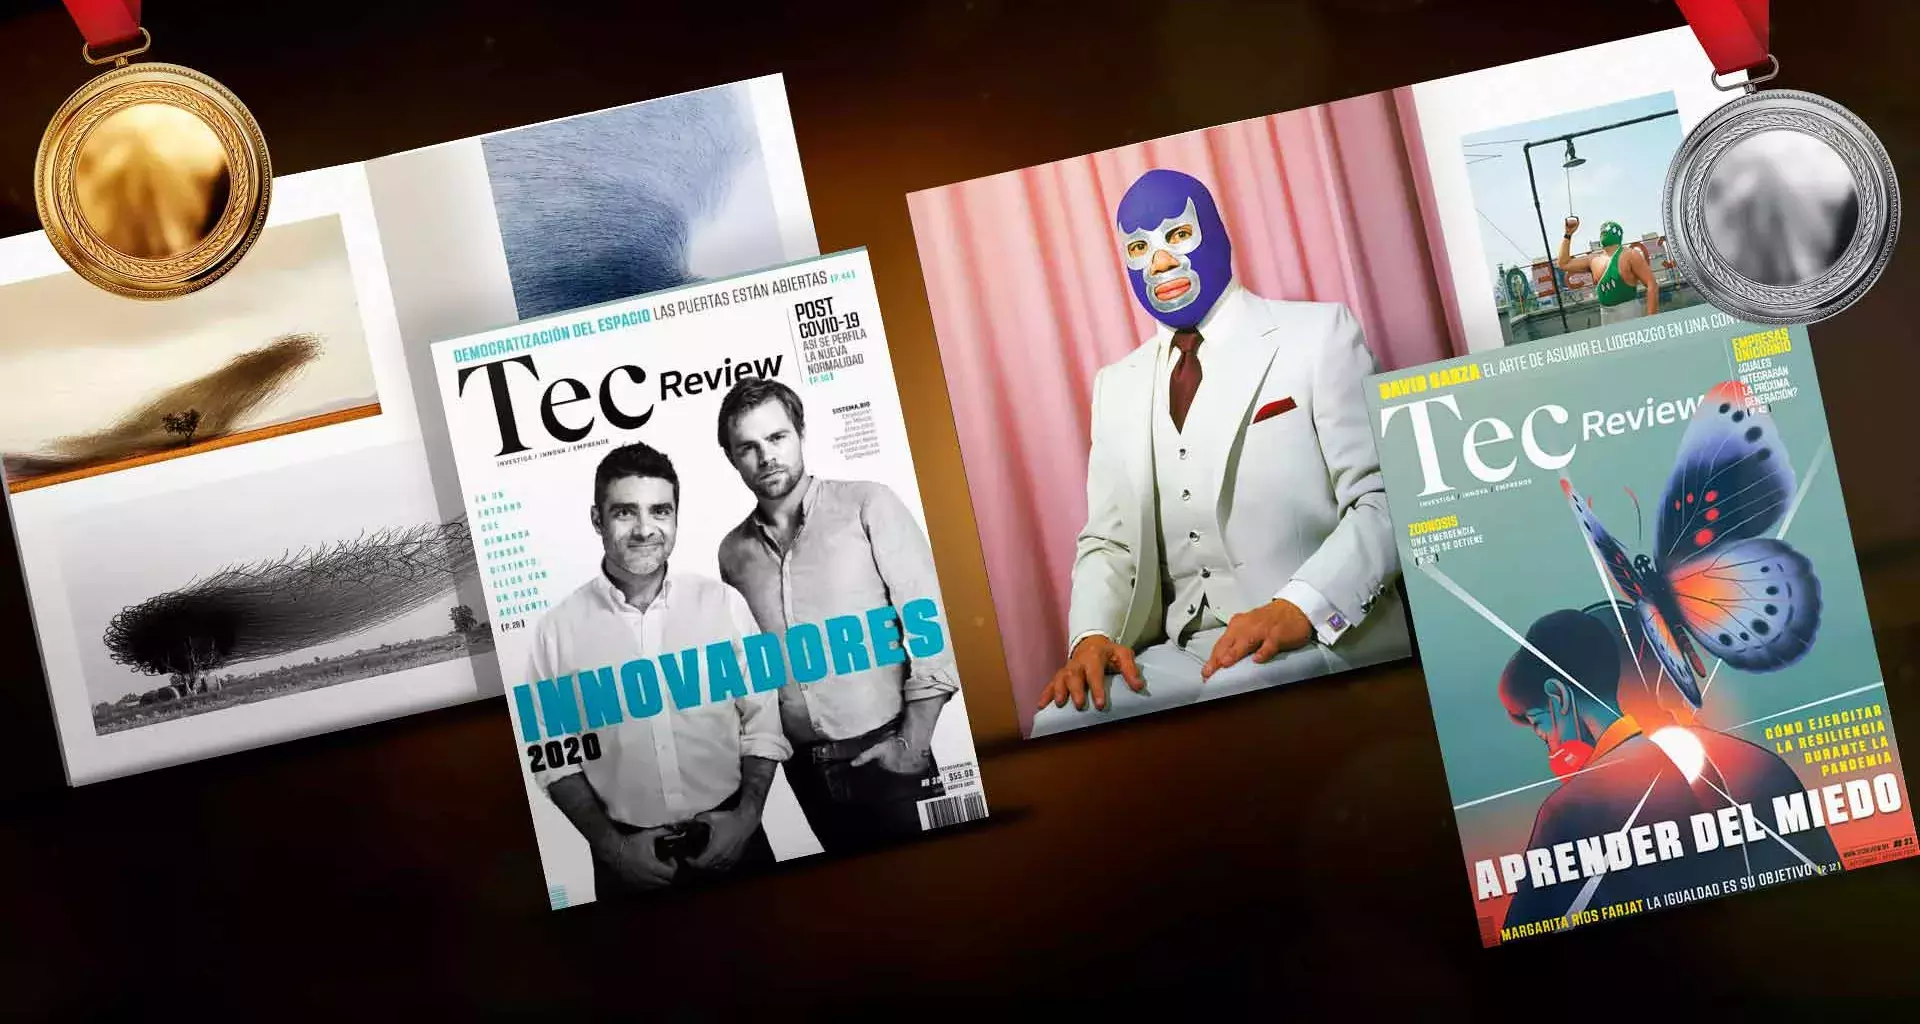 Tec Review makes history, wins gold and silver at publishing “Oscars”